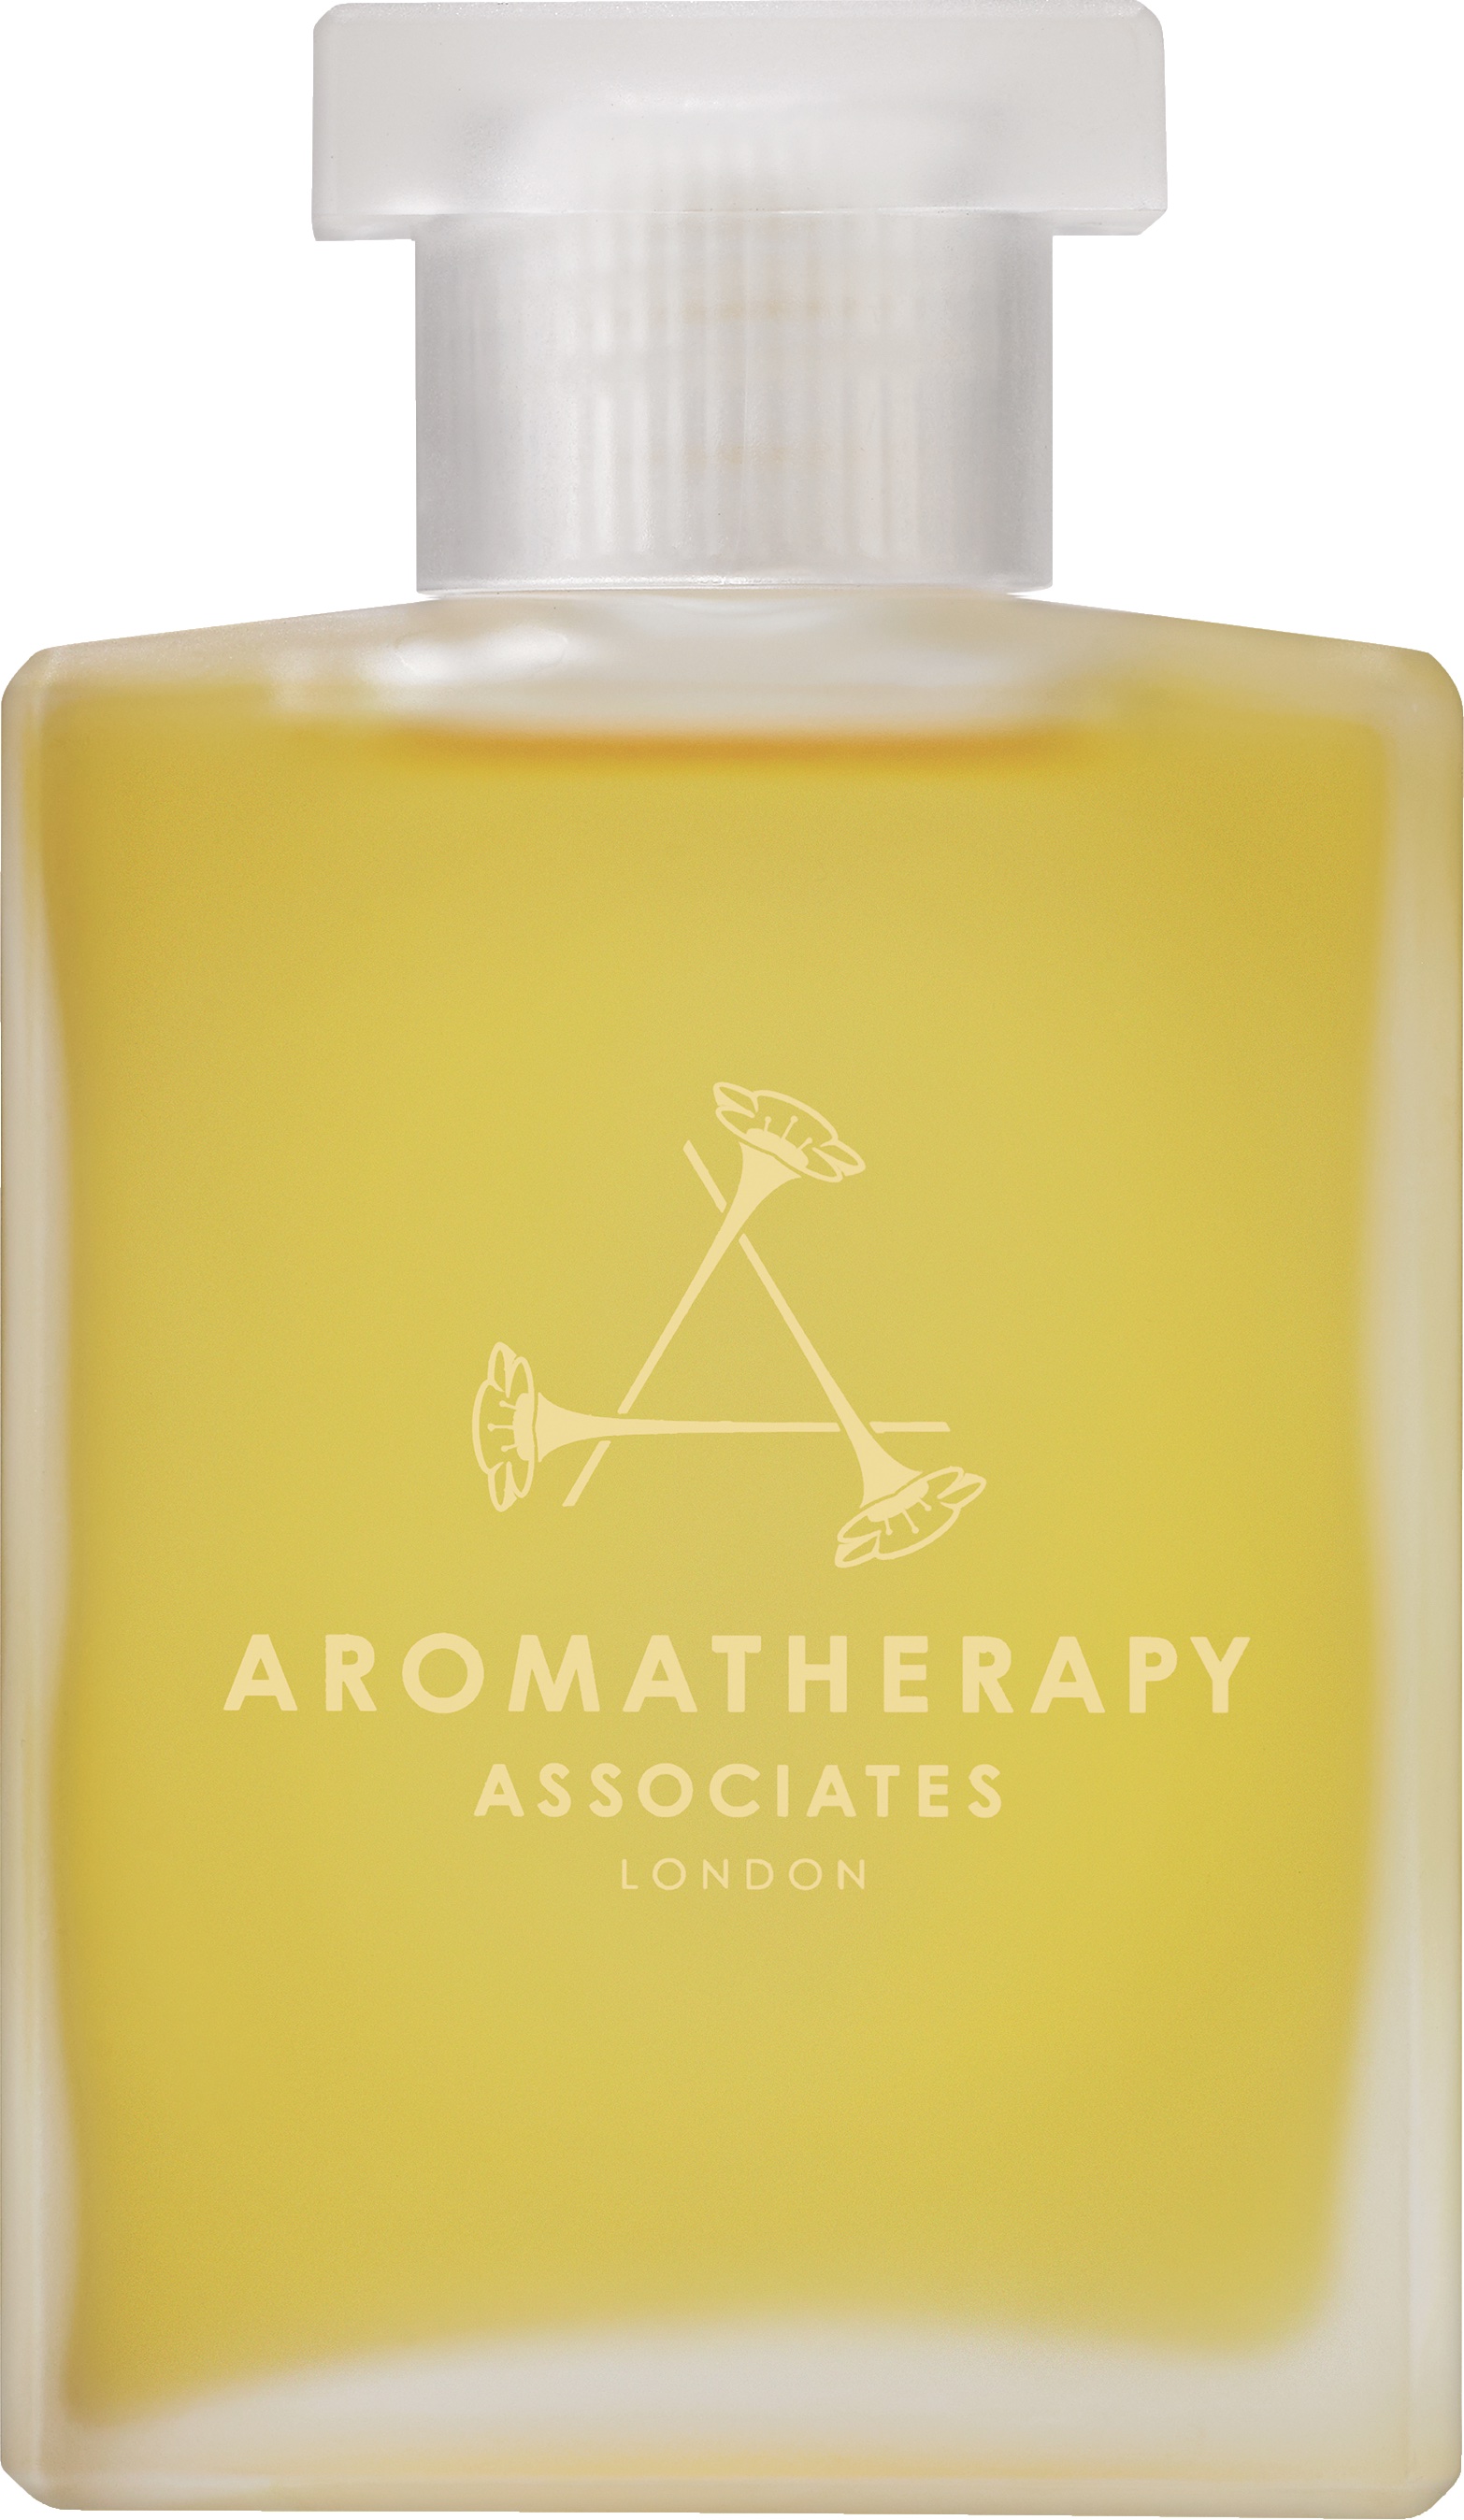 Aromatherapy Associates installs calm with new Forest Bathing range